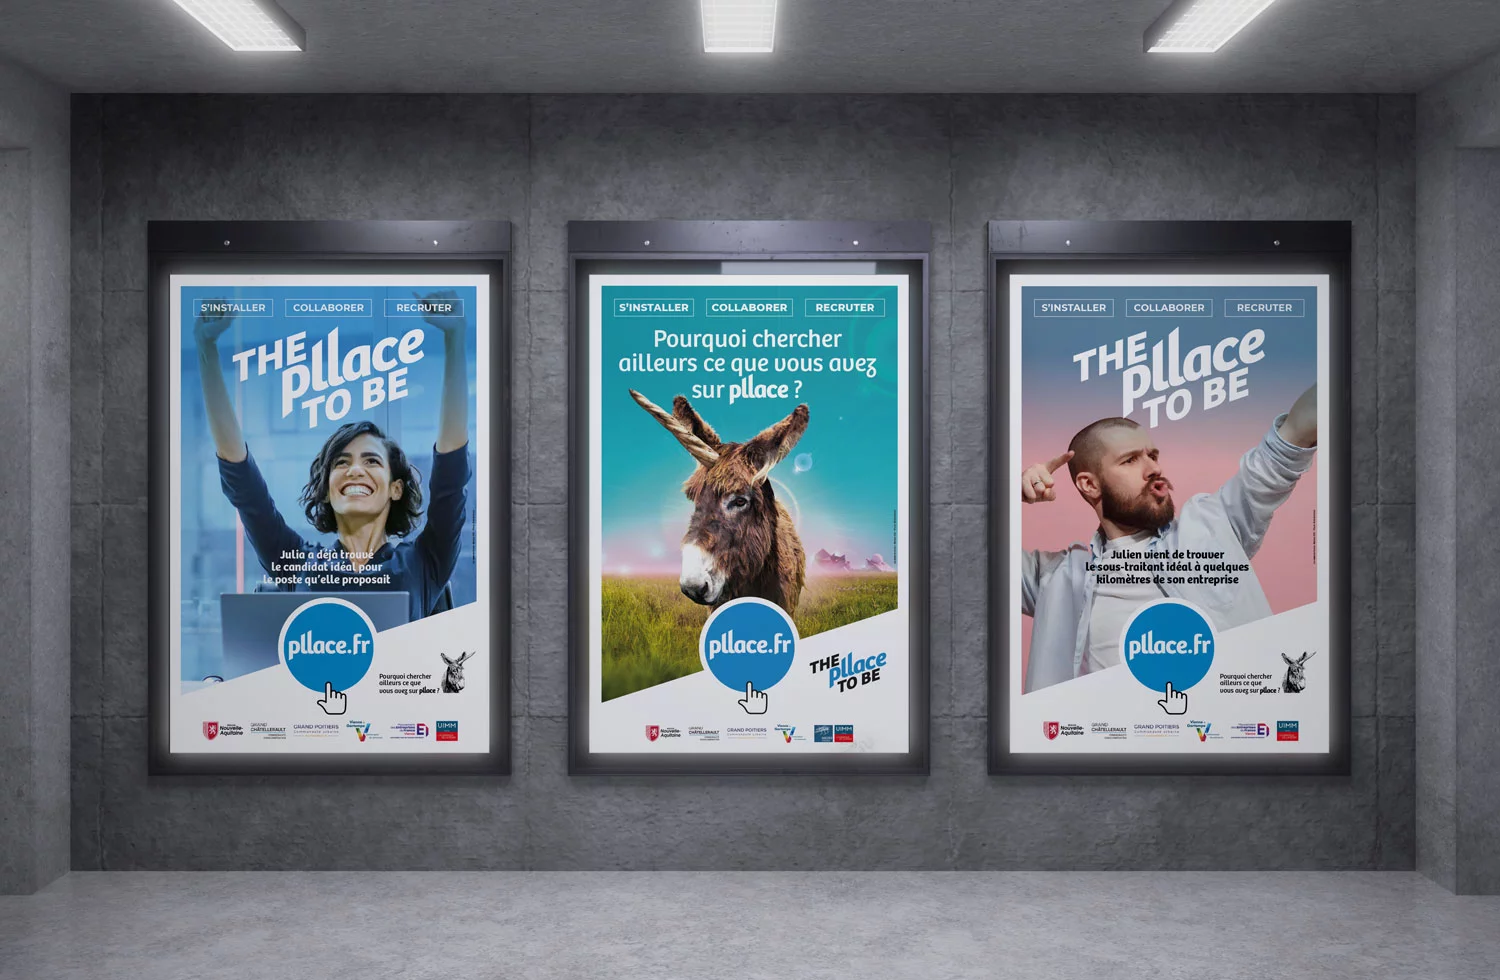 Campagne affichage pllace.fr